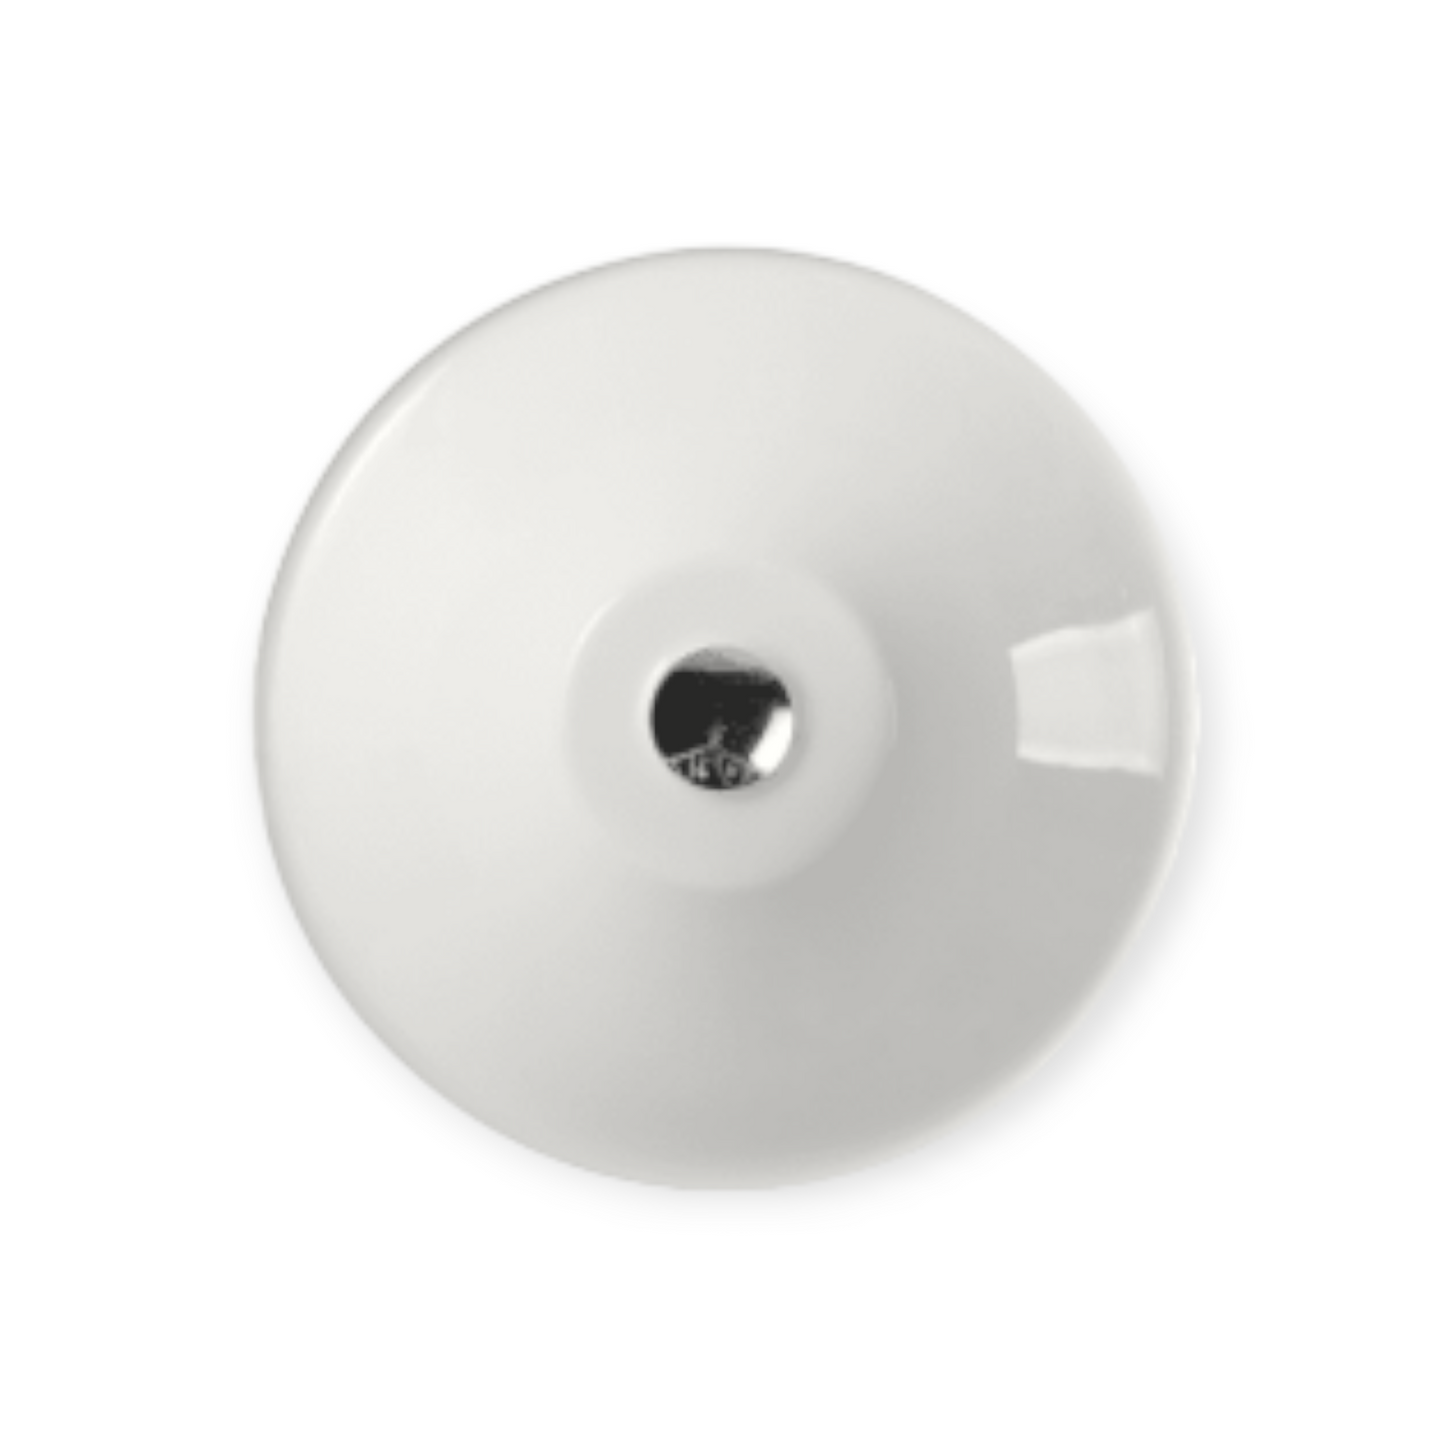 Spin 43B Above Counter Round Basin - Gloss White